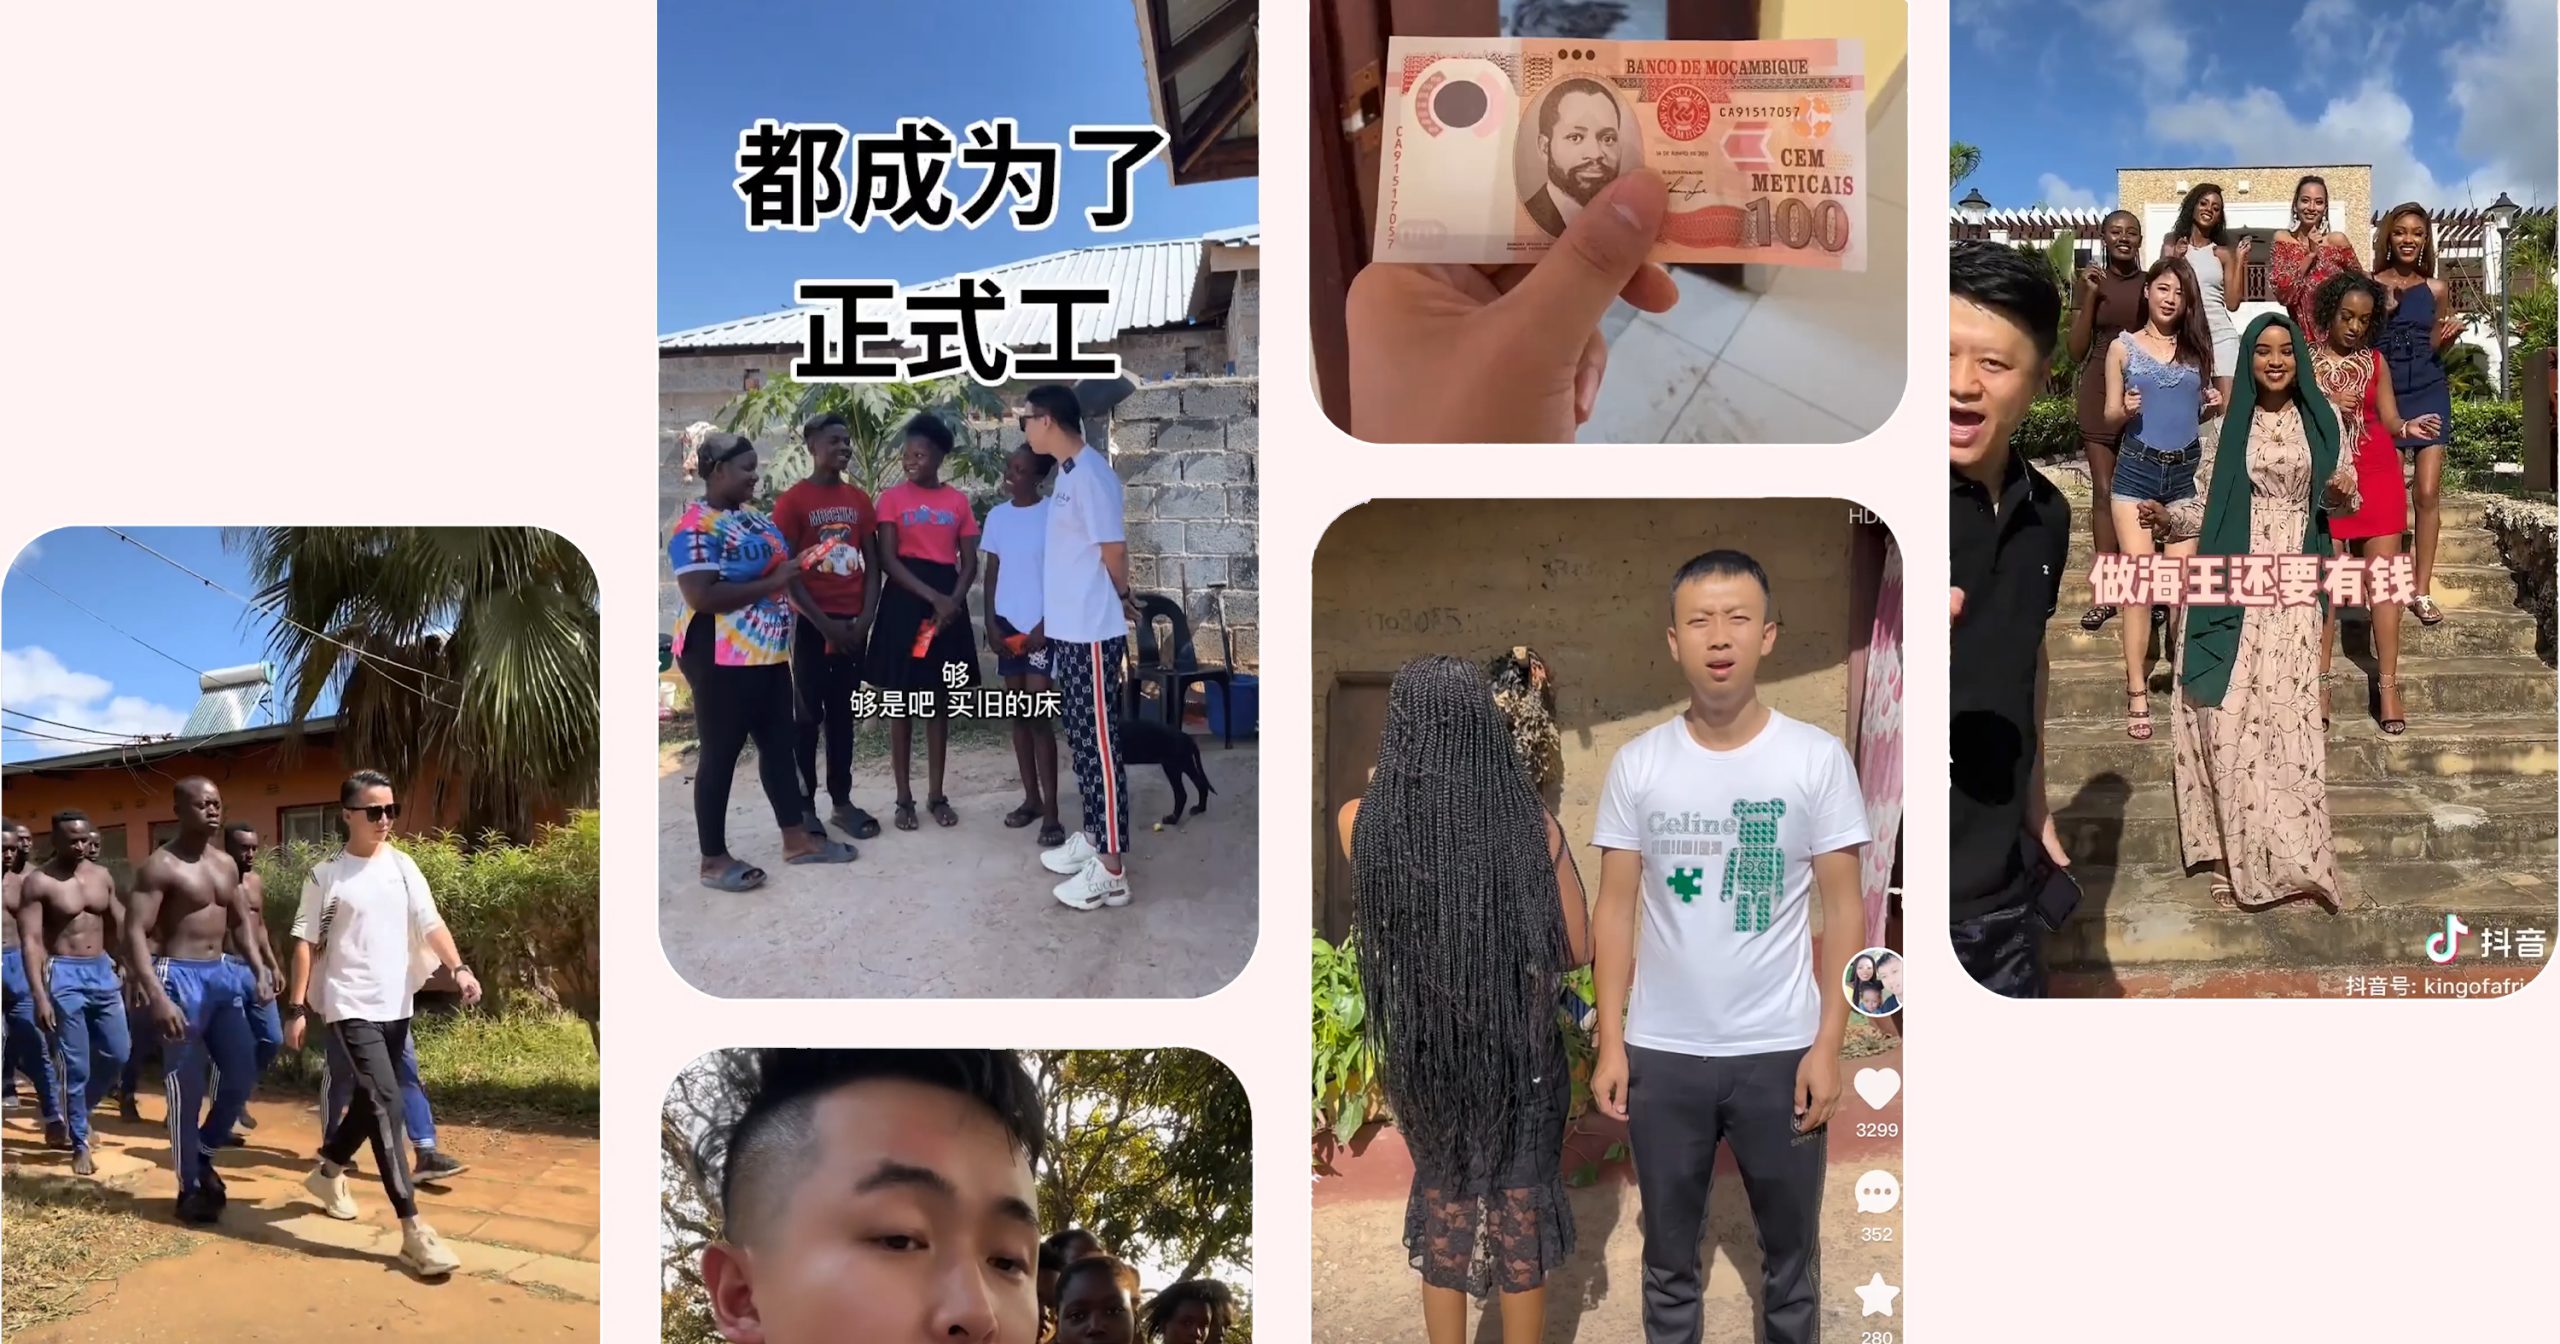 Racist videos about Africans fuel a multimillion-dollar Chinese industry